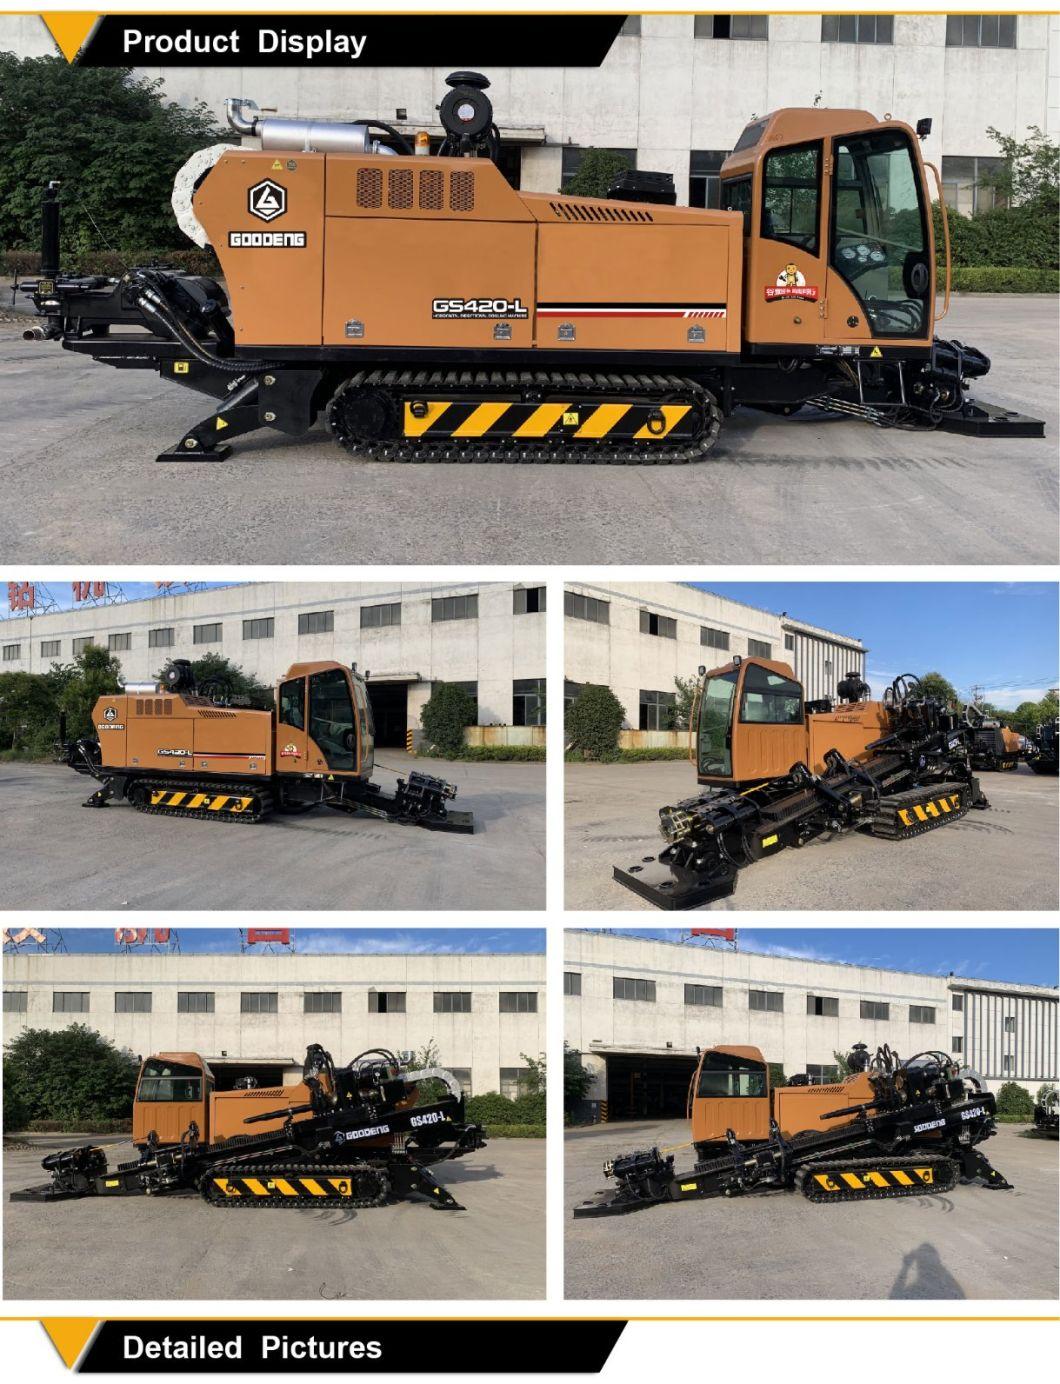 GS420-LS drilling rig horizontal directional drilling machine